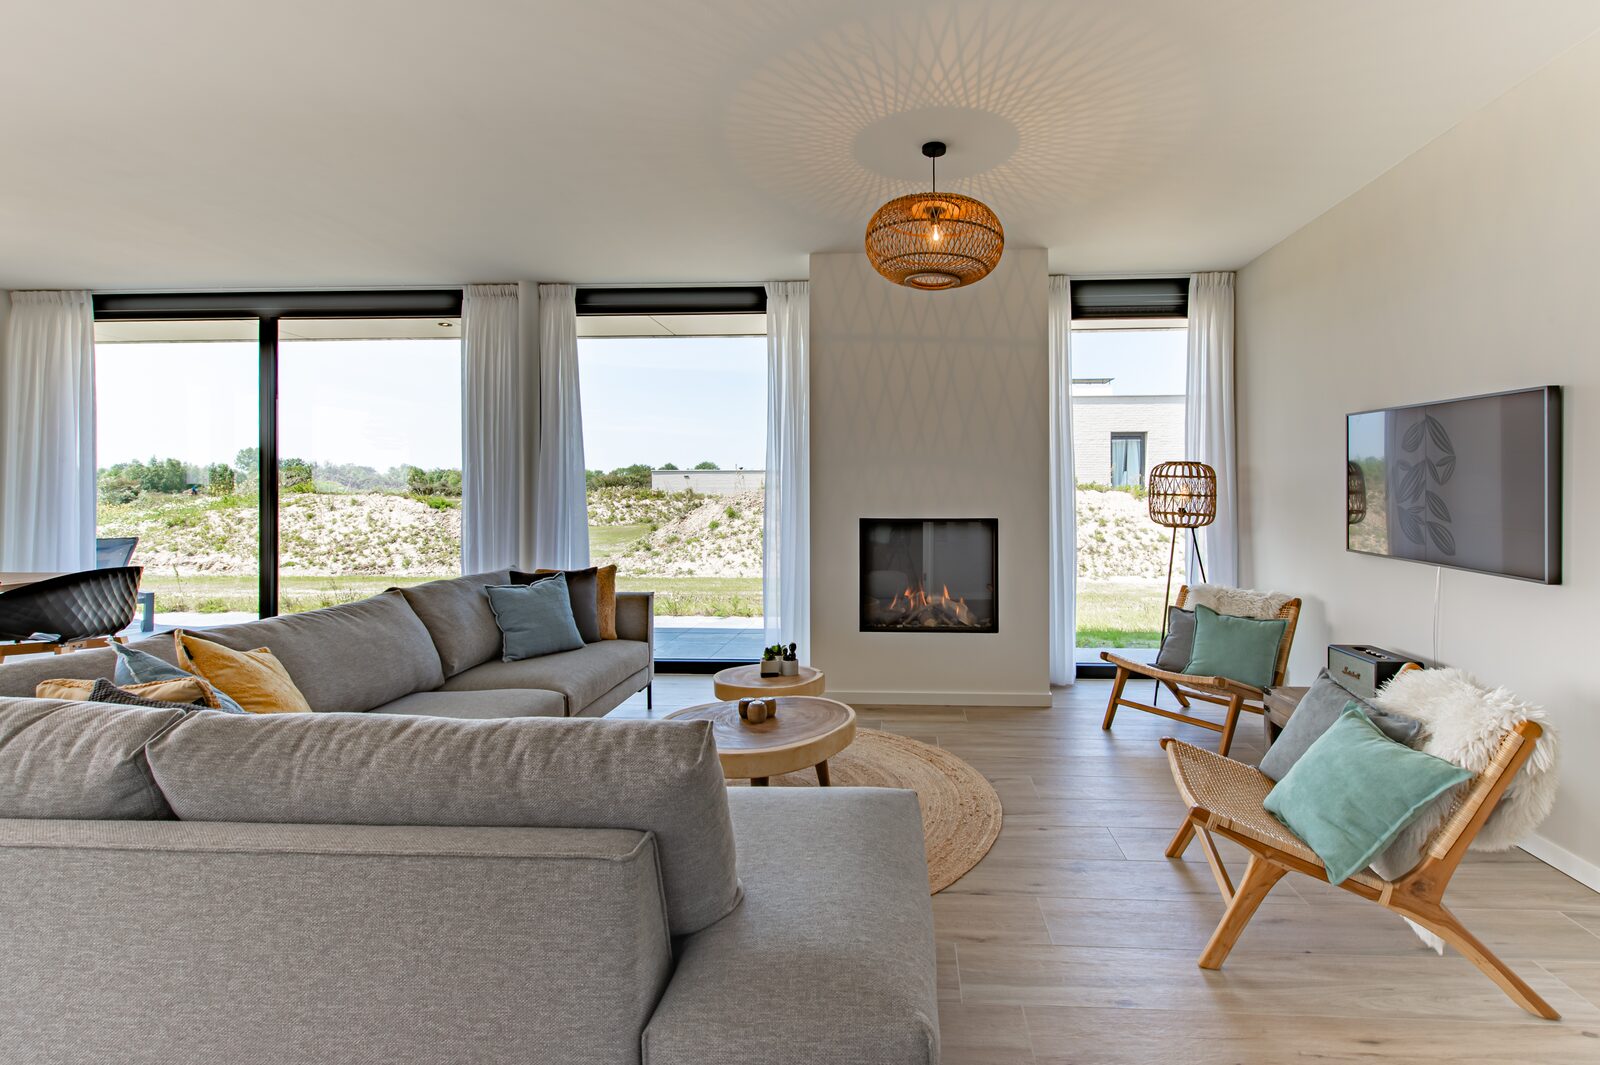 Luxury holiday villa for 8 persons in zeeland